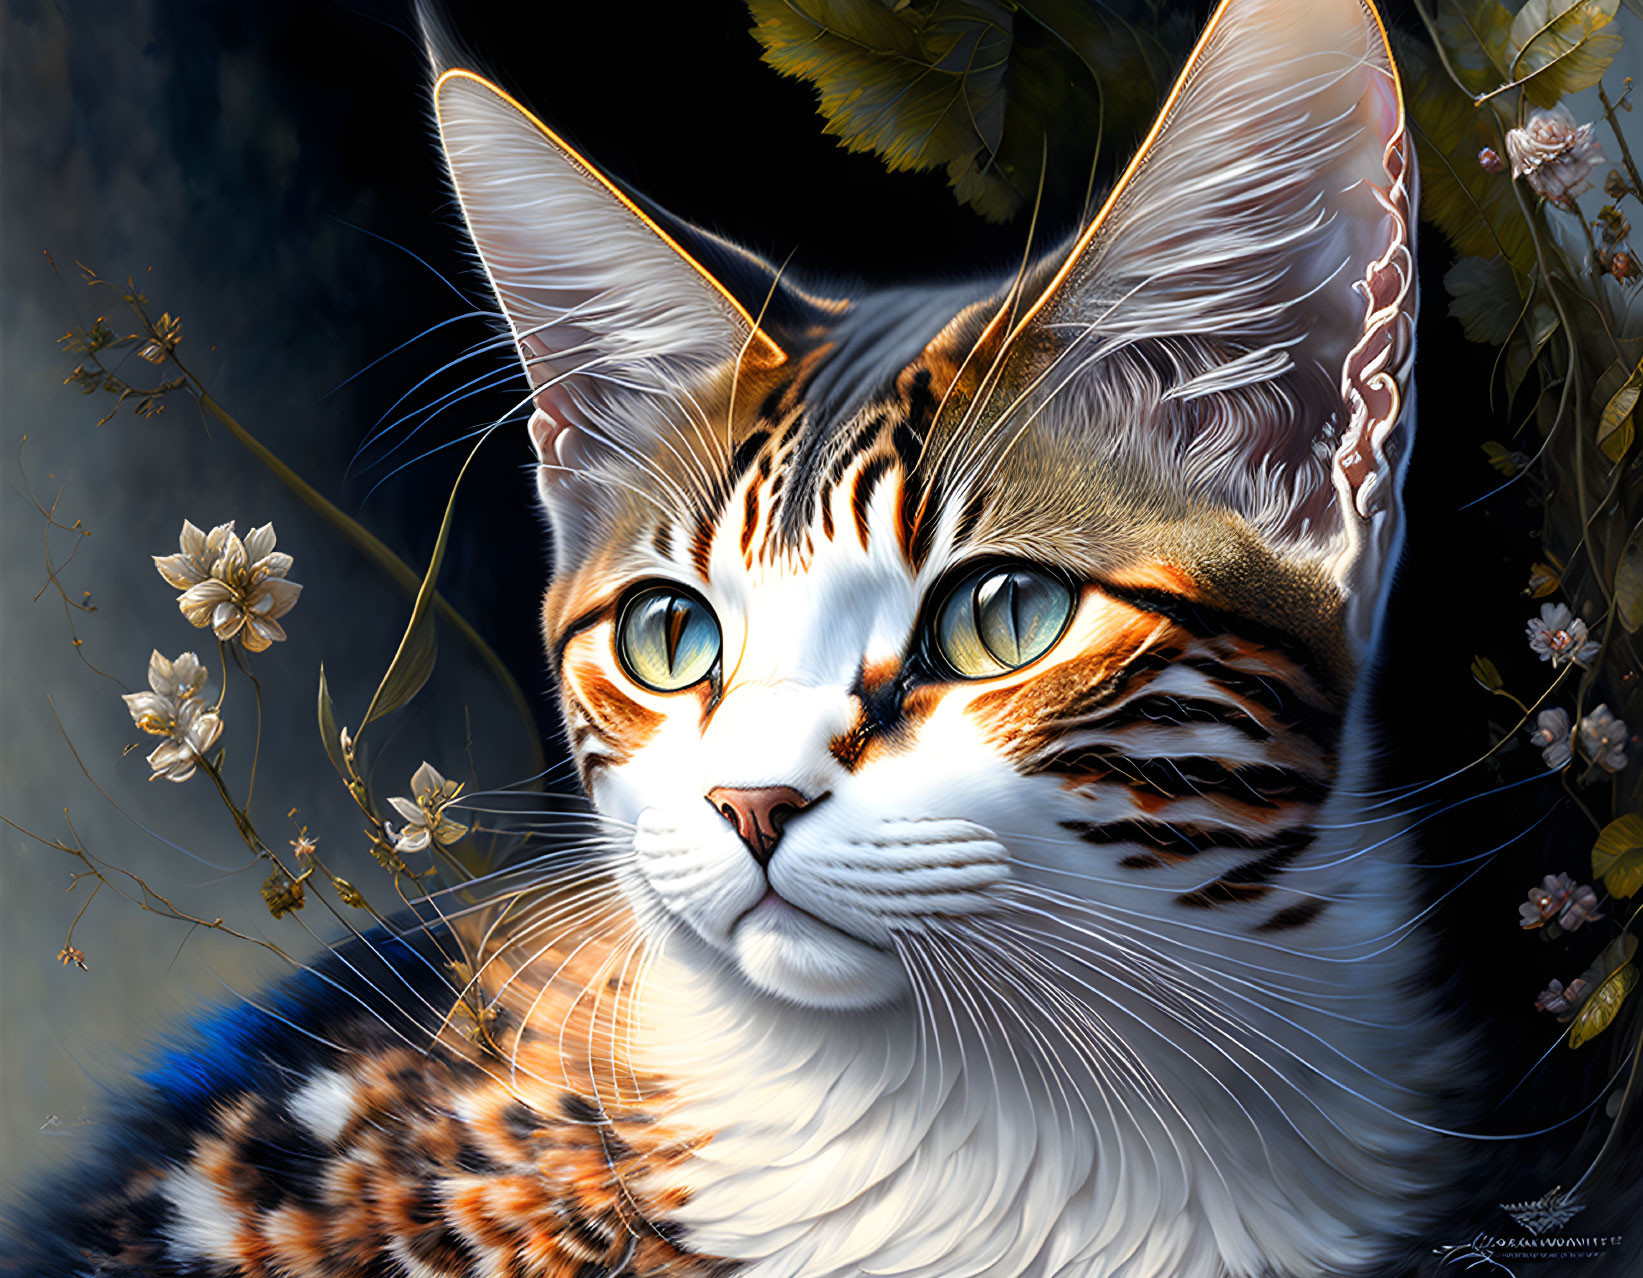 Detailed digital art portrait of a cat with striking patterns and green eyes on dark backdrop with white flowers